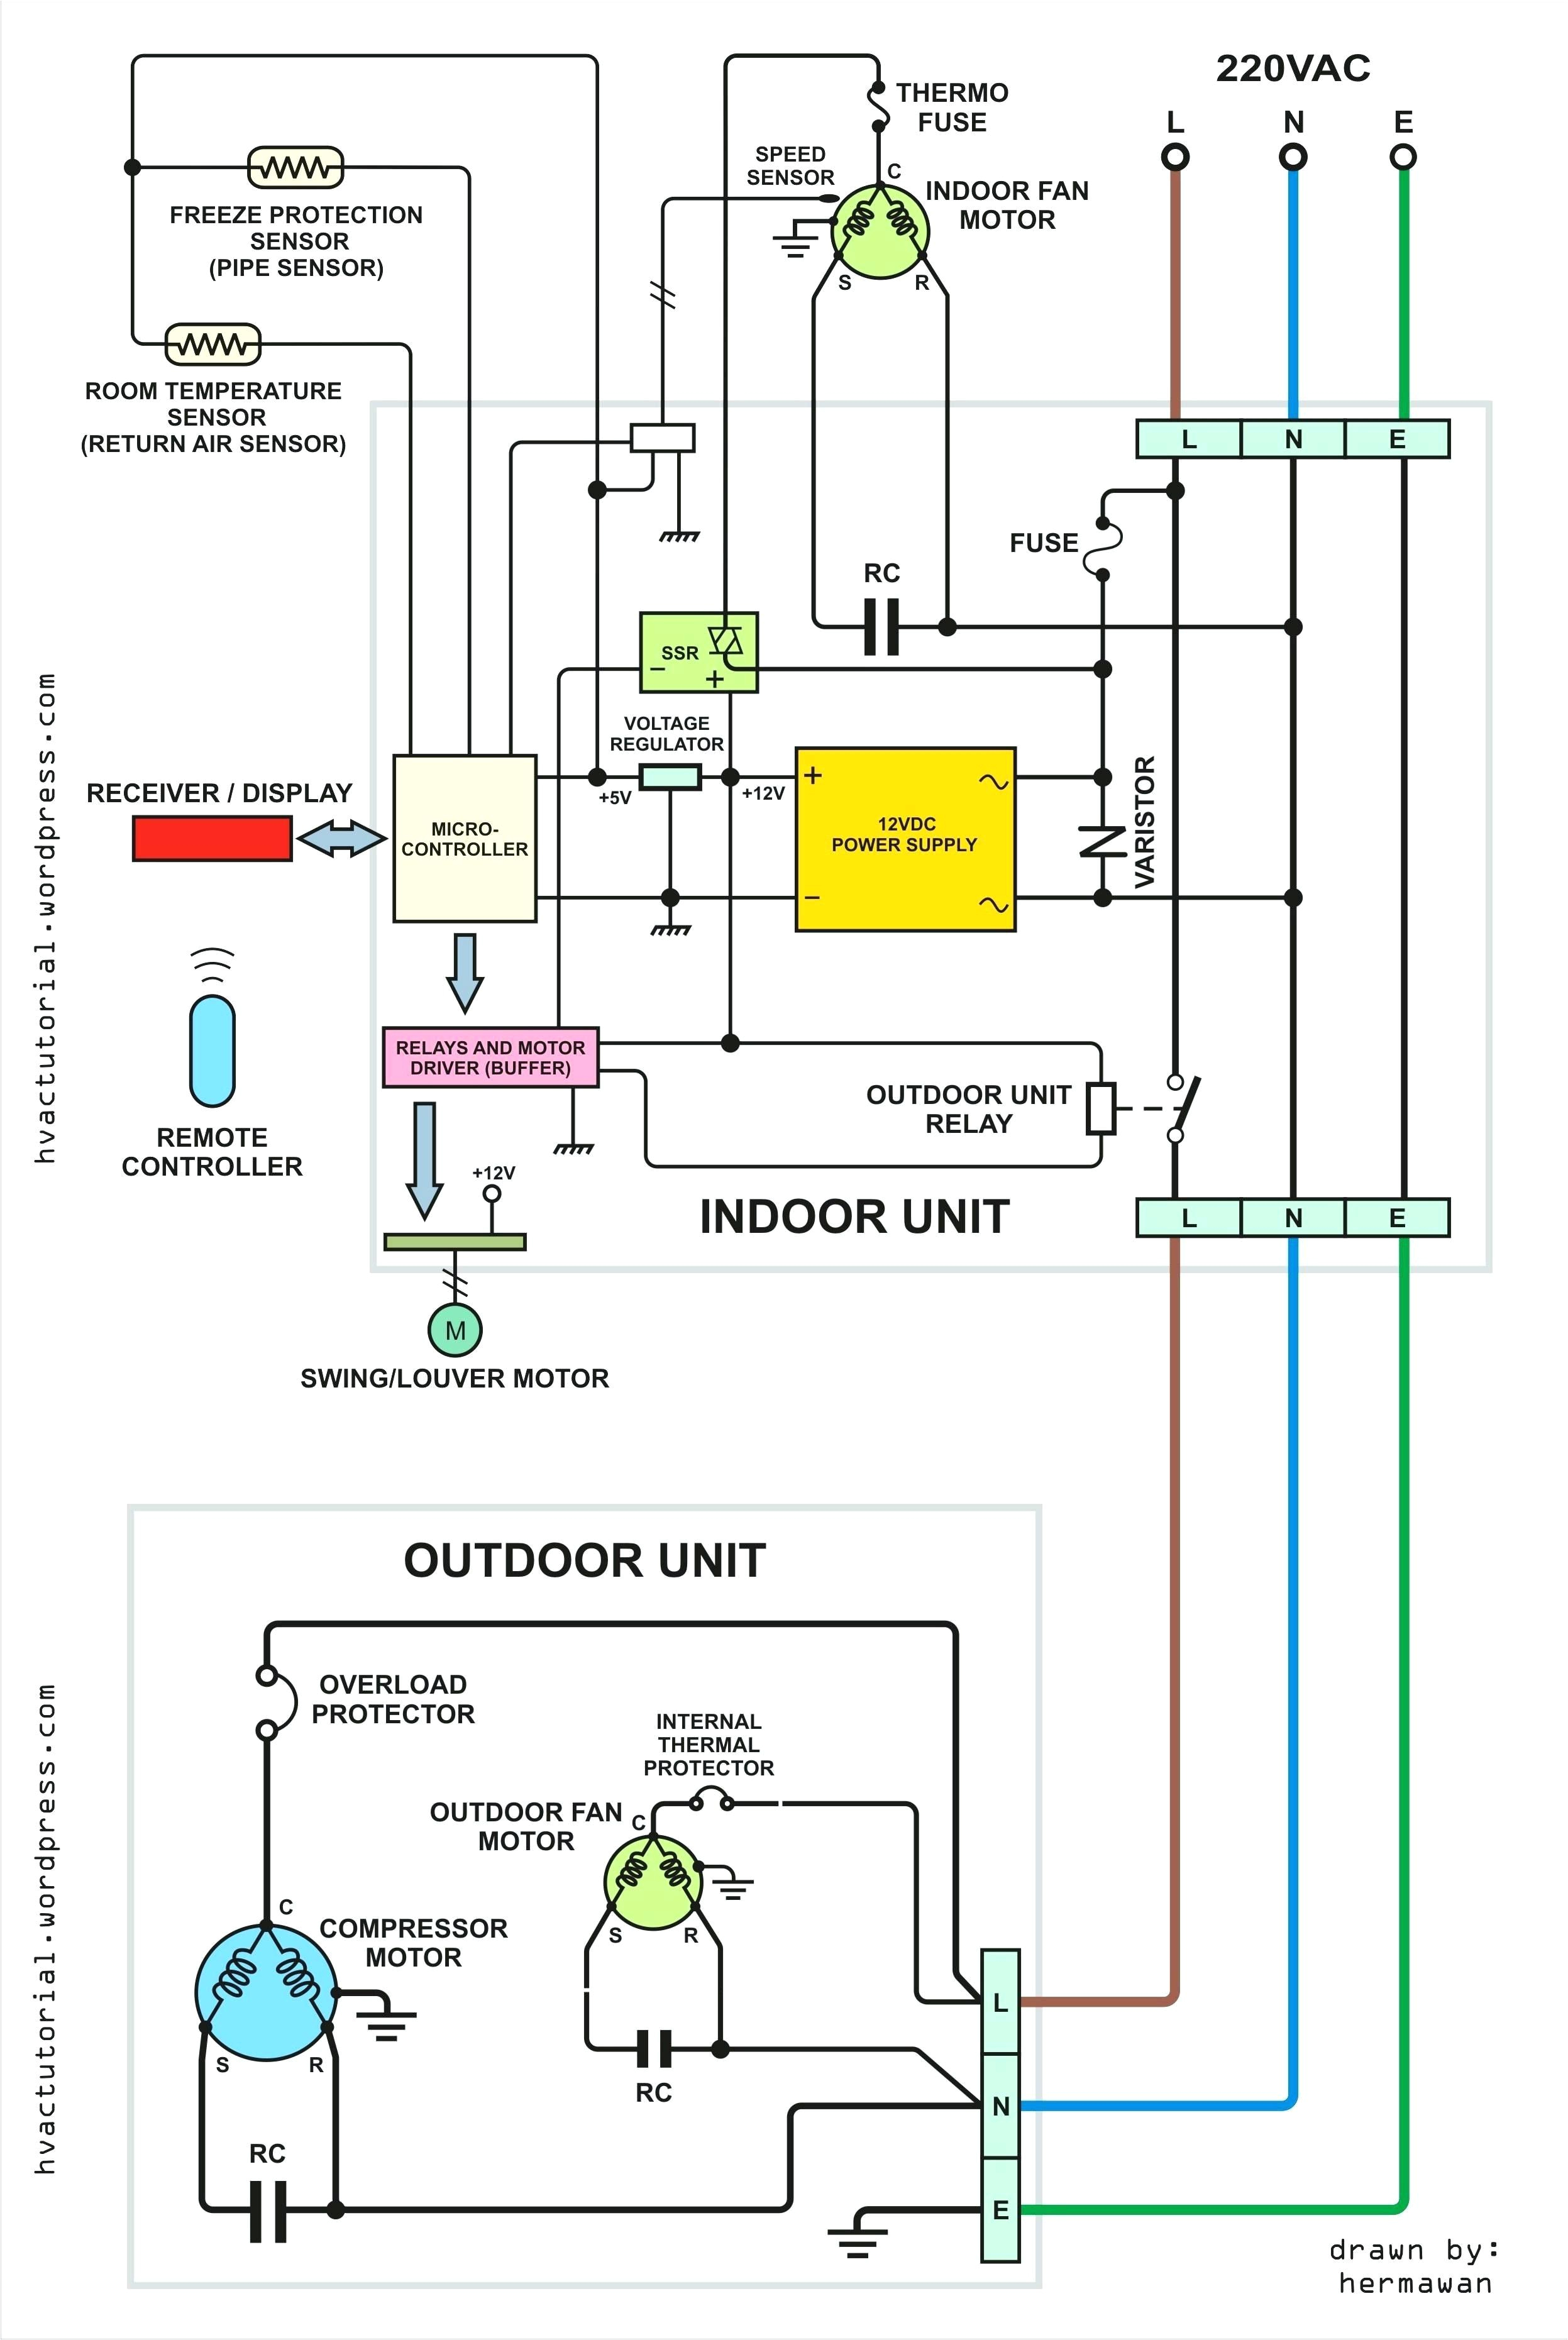 hid edge wiring diagram free download schematic wiring diagram article mobile wiring nordyne ac units wiring